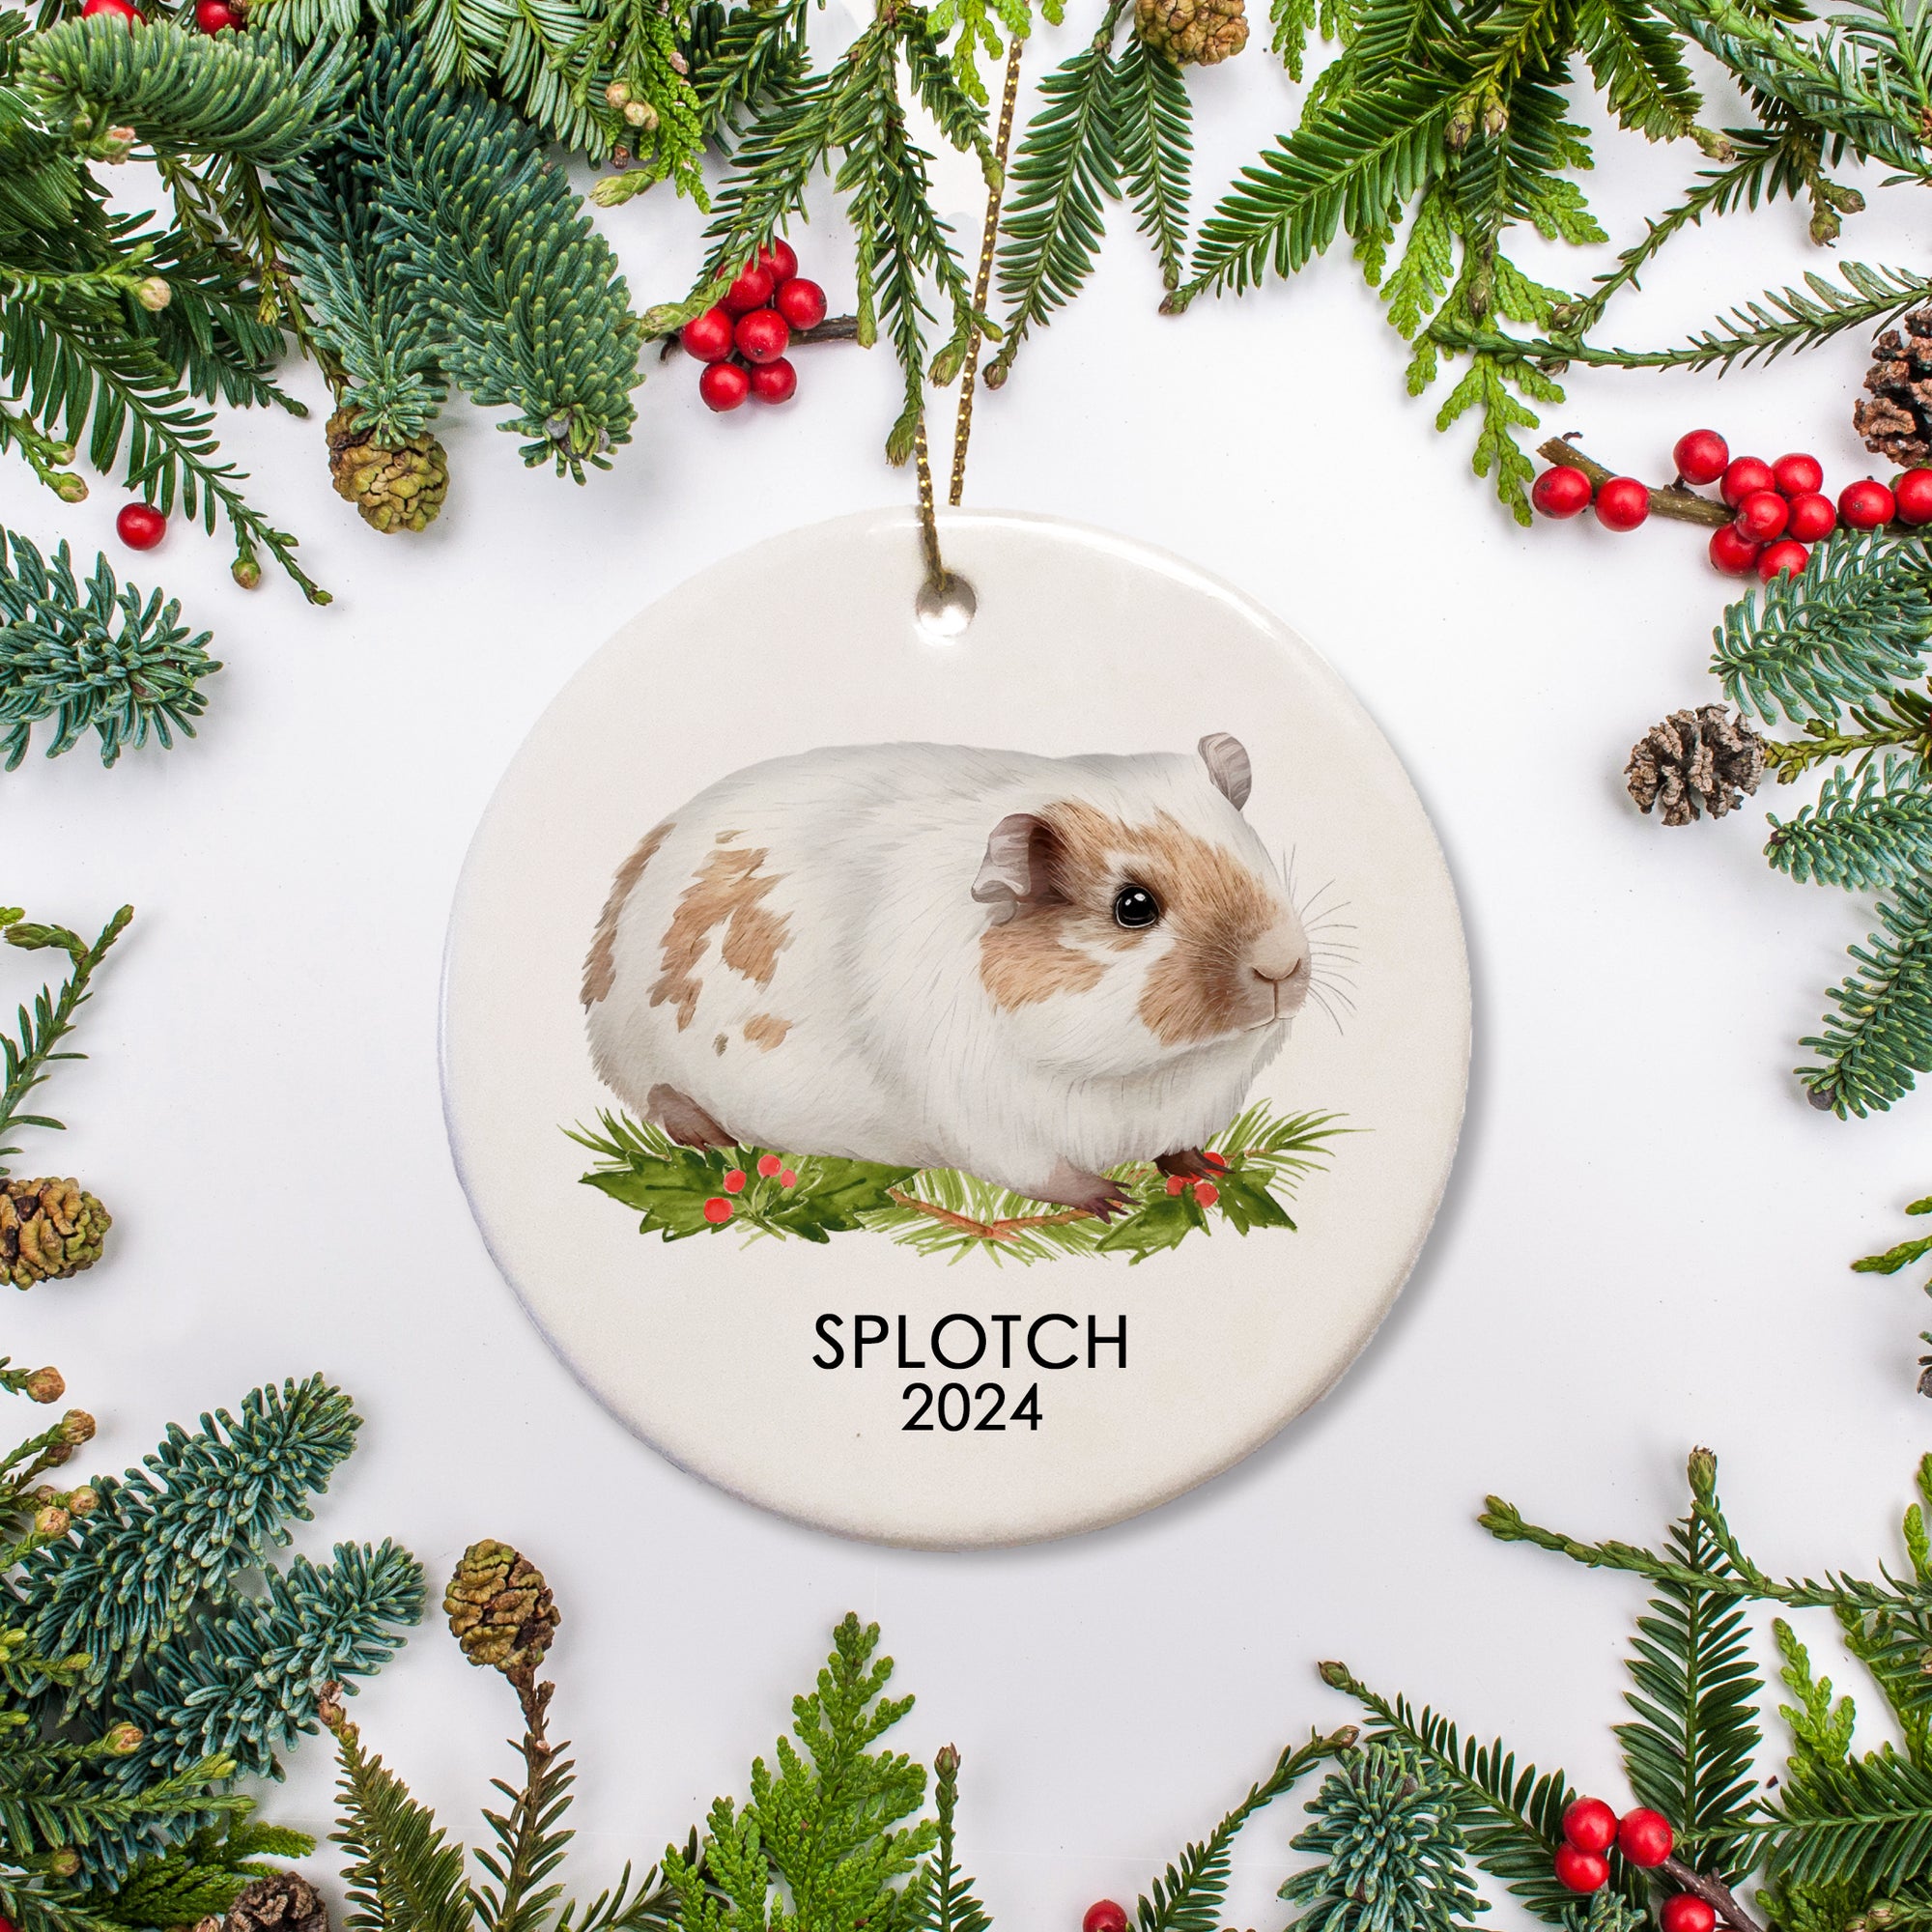 A special ornament for a special guinea pig. This is ceramic and includes a name and date for a beige and white guinea pig